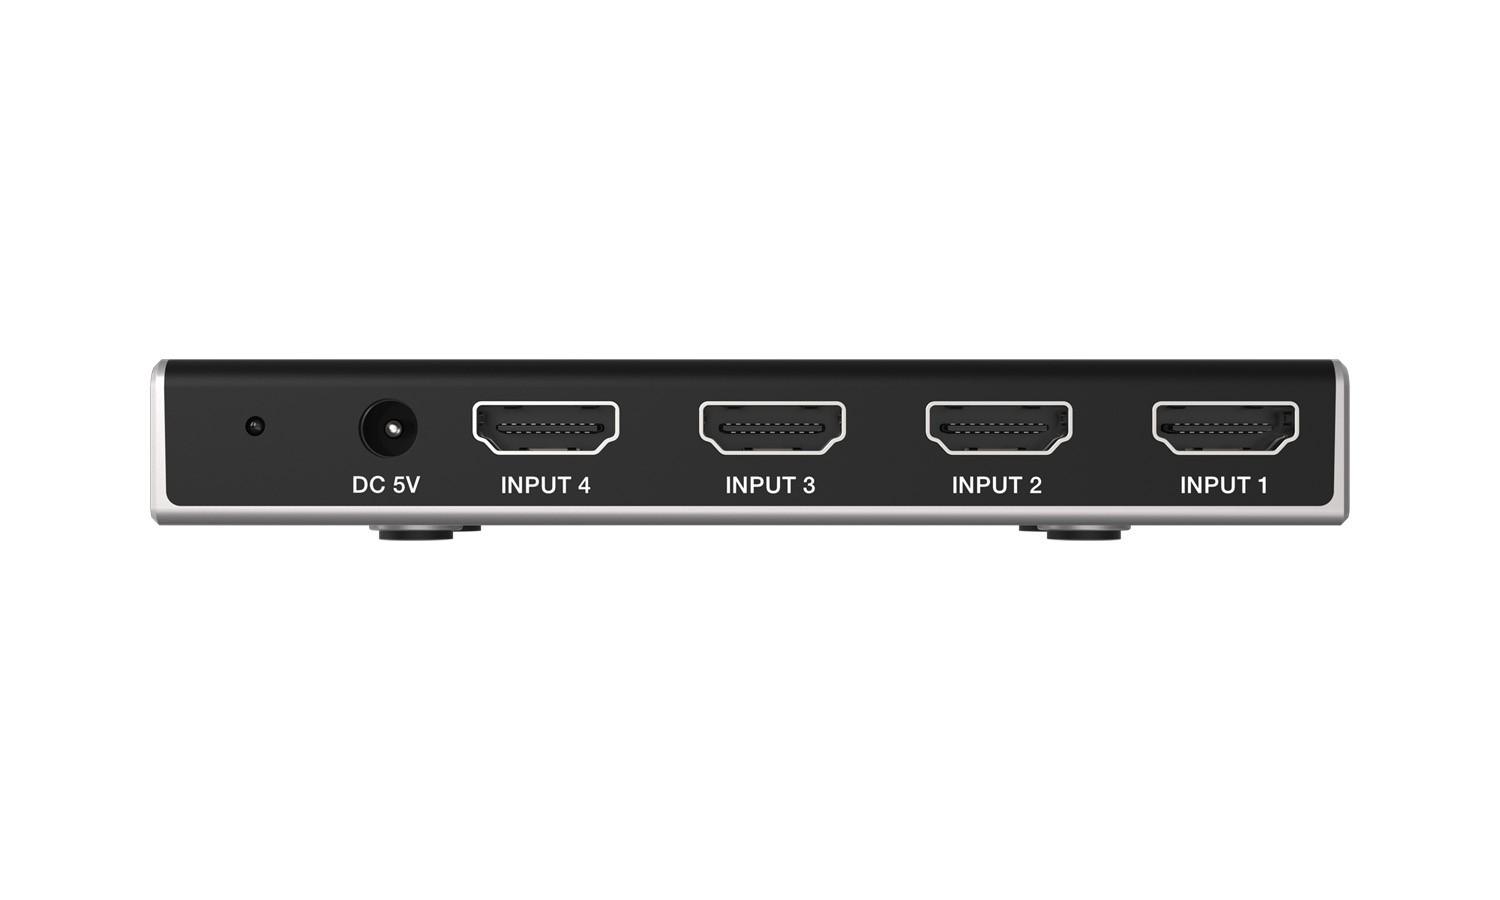 4x1 HDMI Switch: 4-In-1-Out Supports UltraHD 8K, Dolby Vision, HDR10+, Auto  Switching (BK-401)